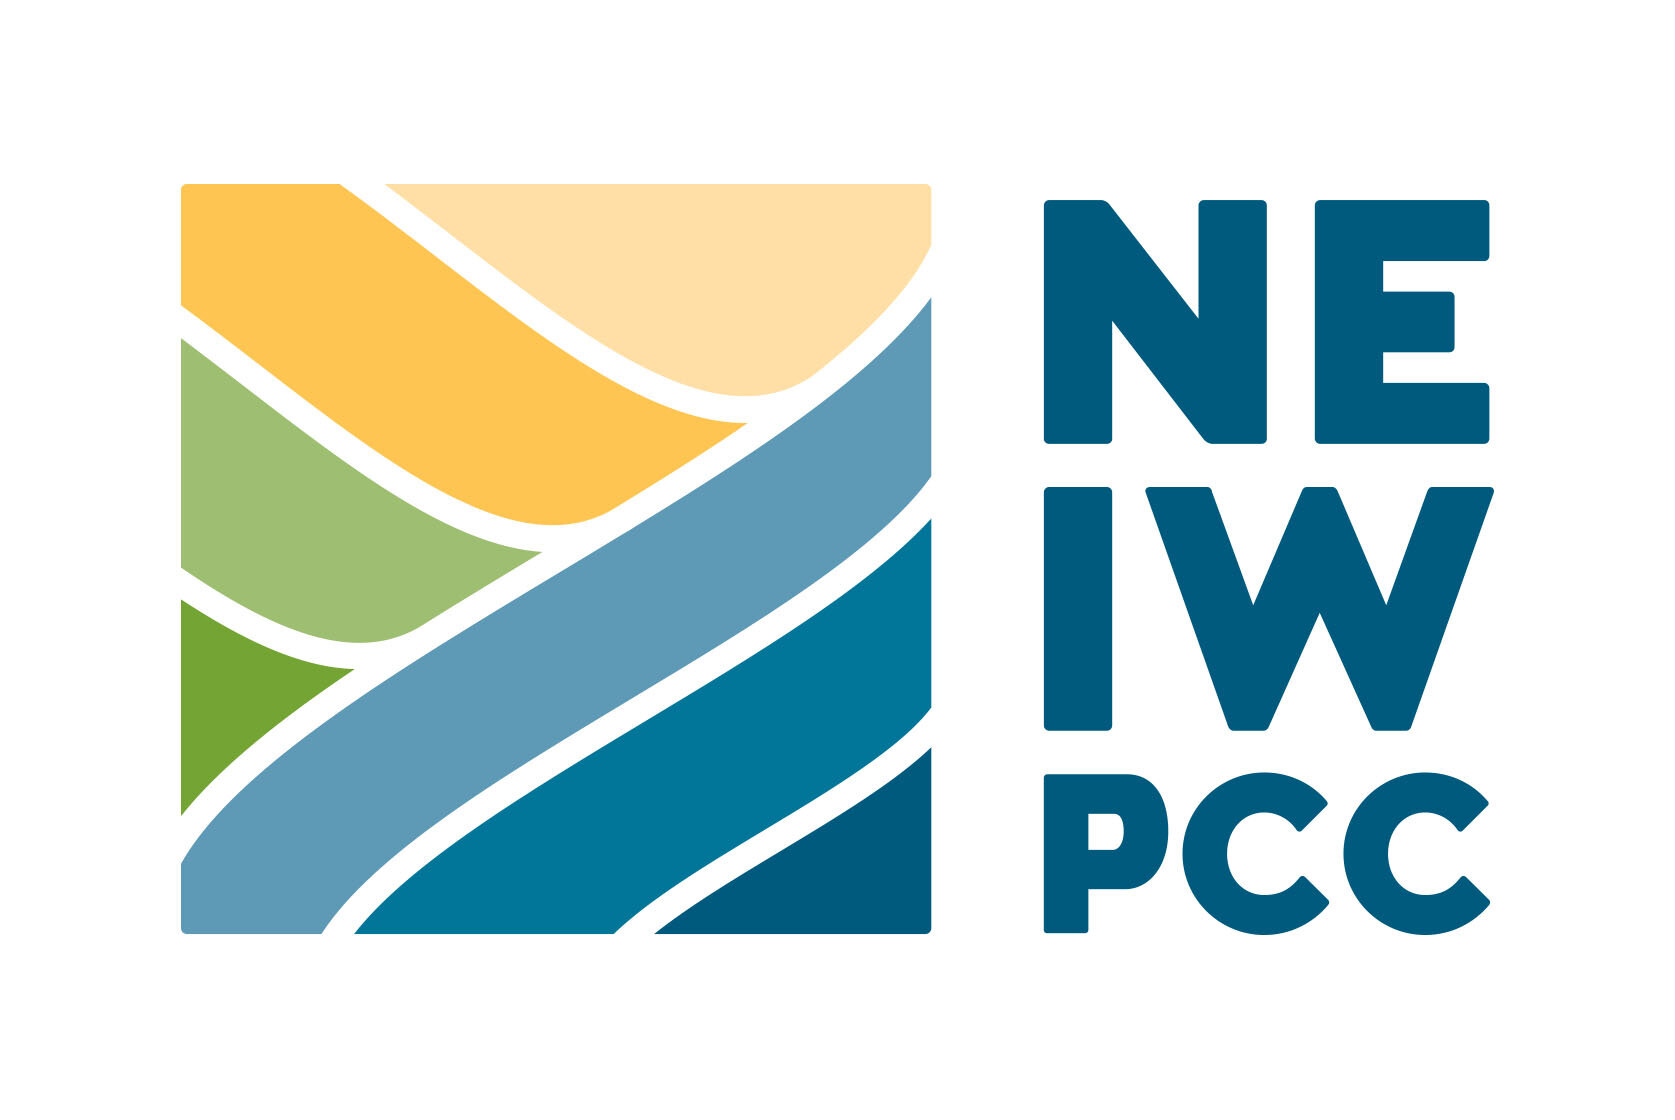  NEIWPCC is the fiscal partner of LCBP, which supplies funding for a variety of LCA projects. 